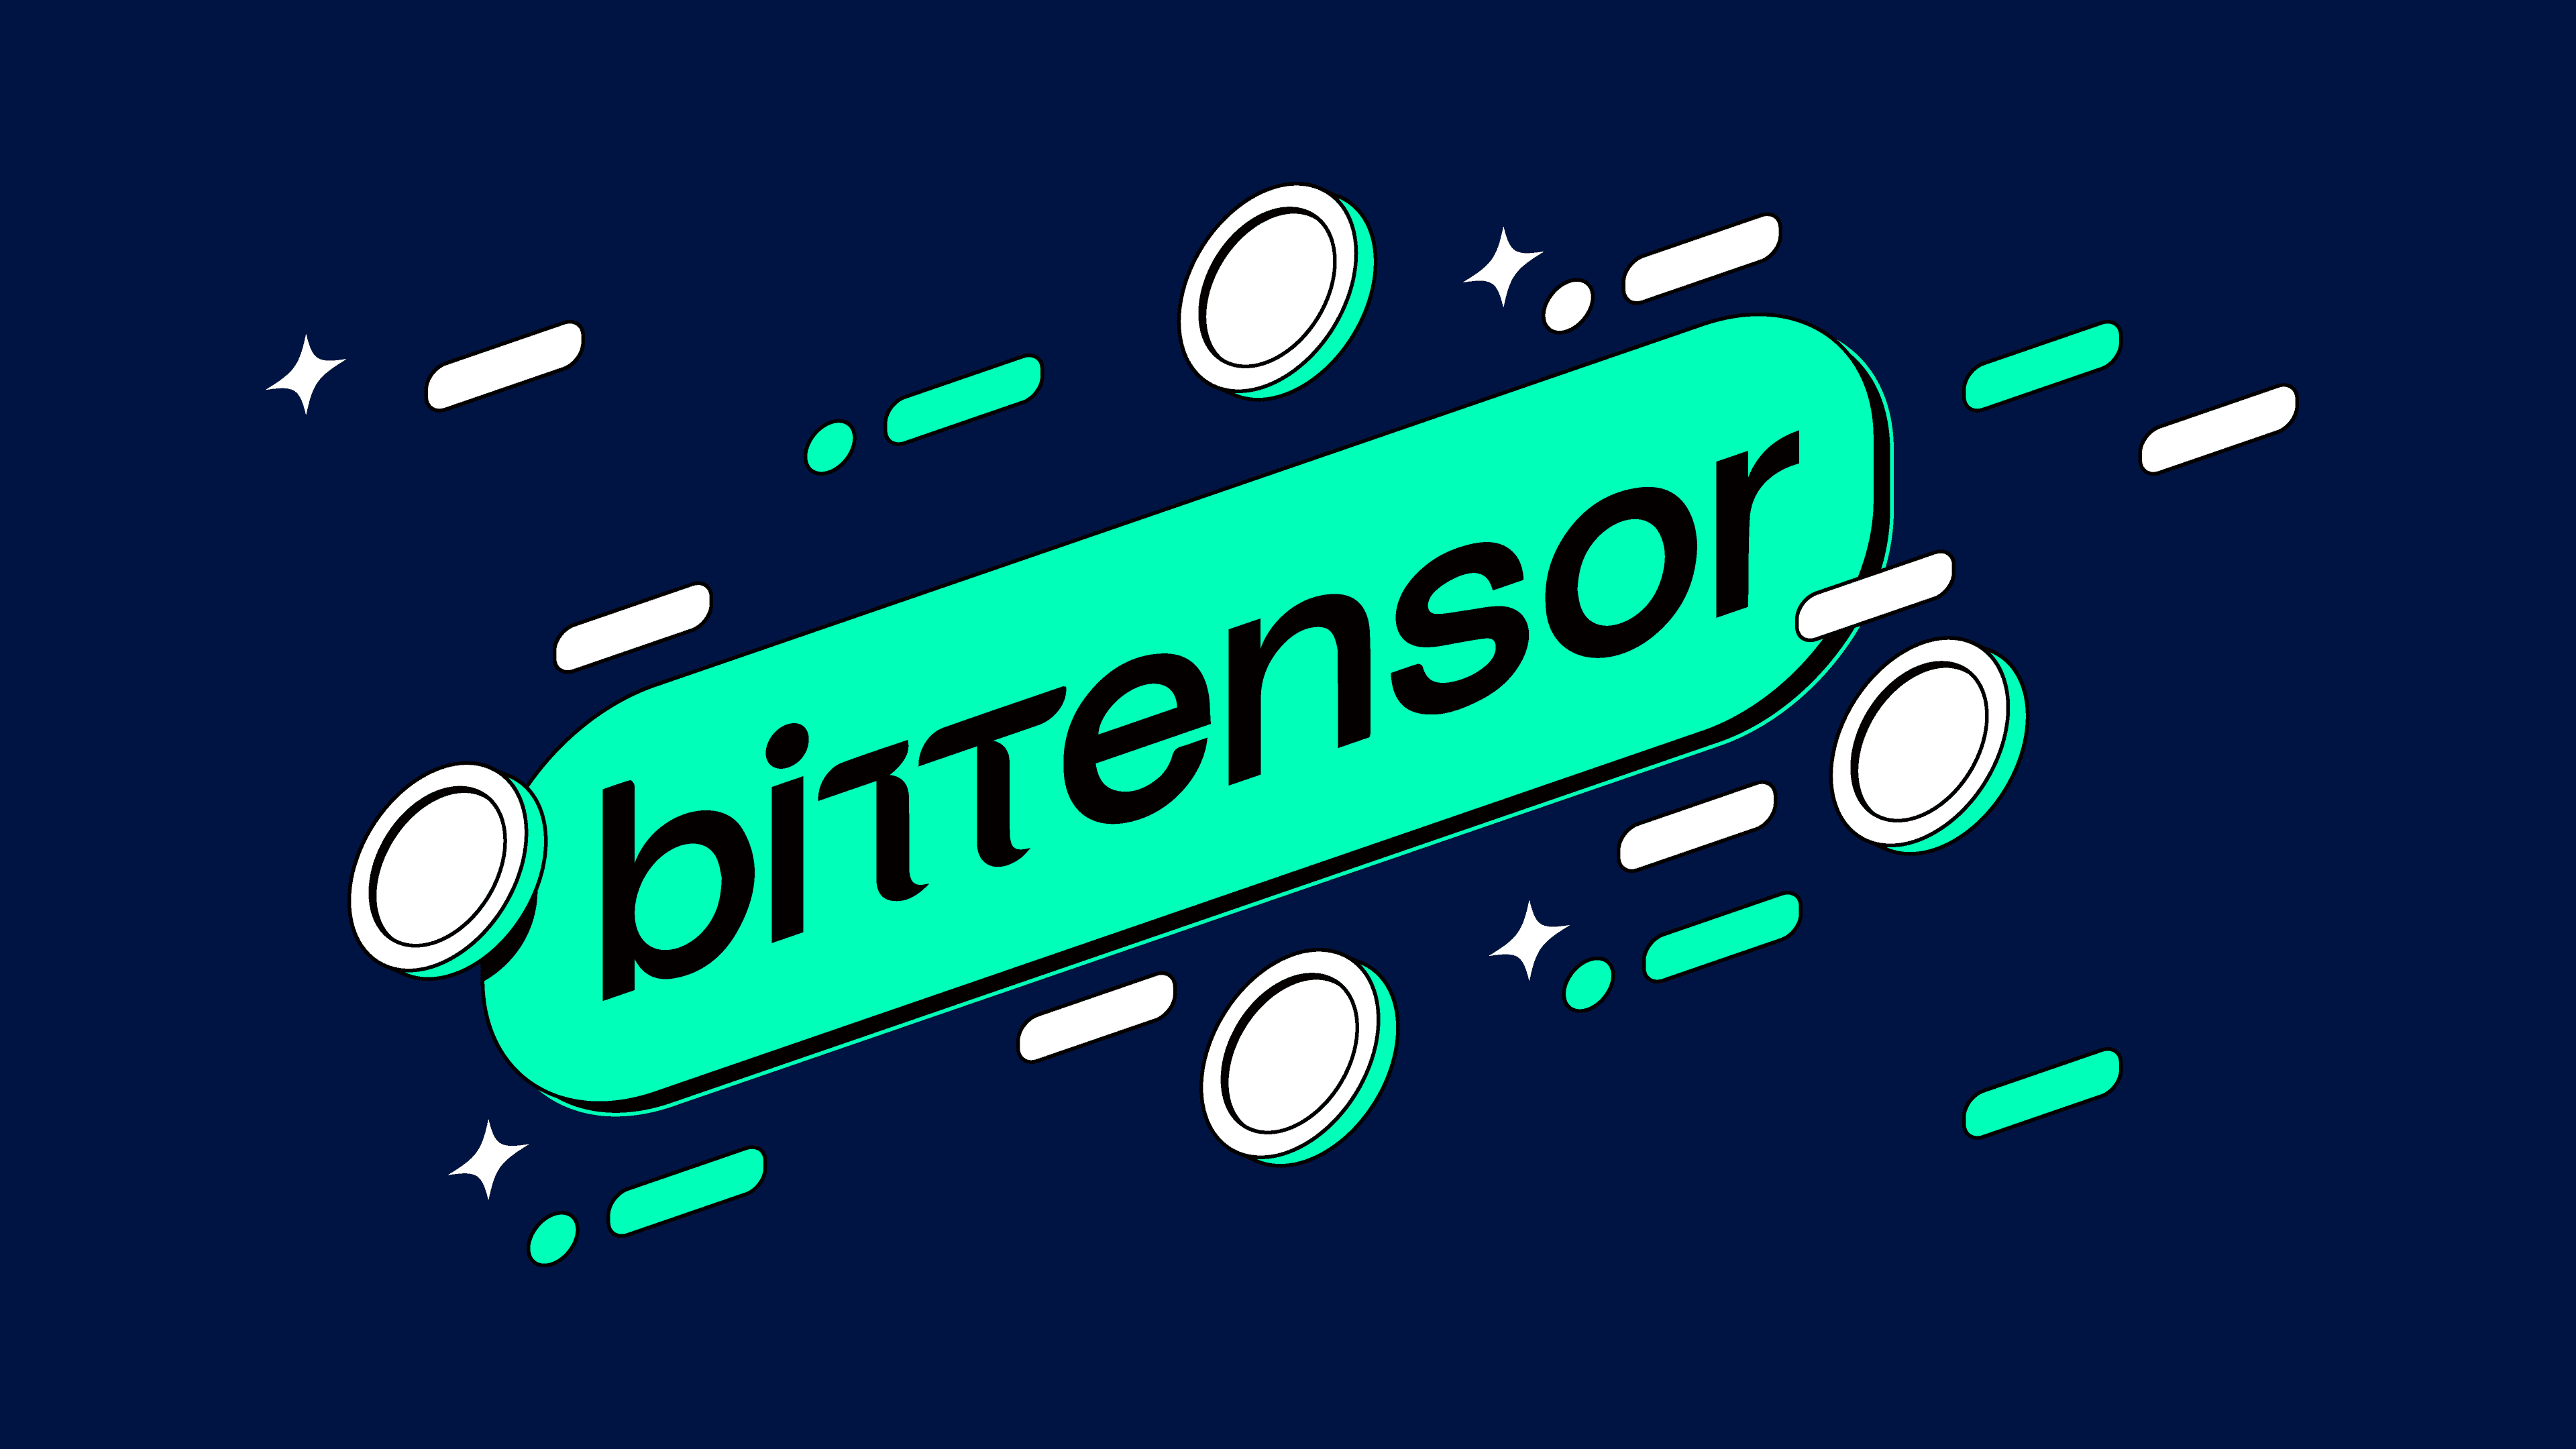 A Brief Introduction to Bittensor